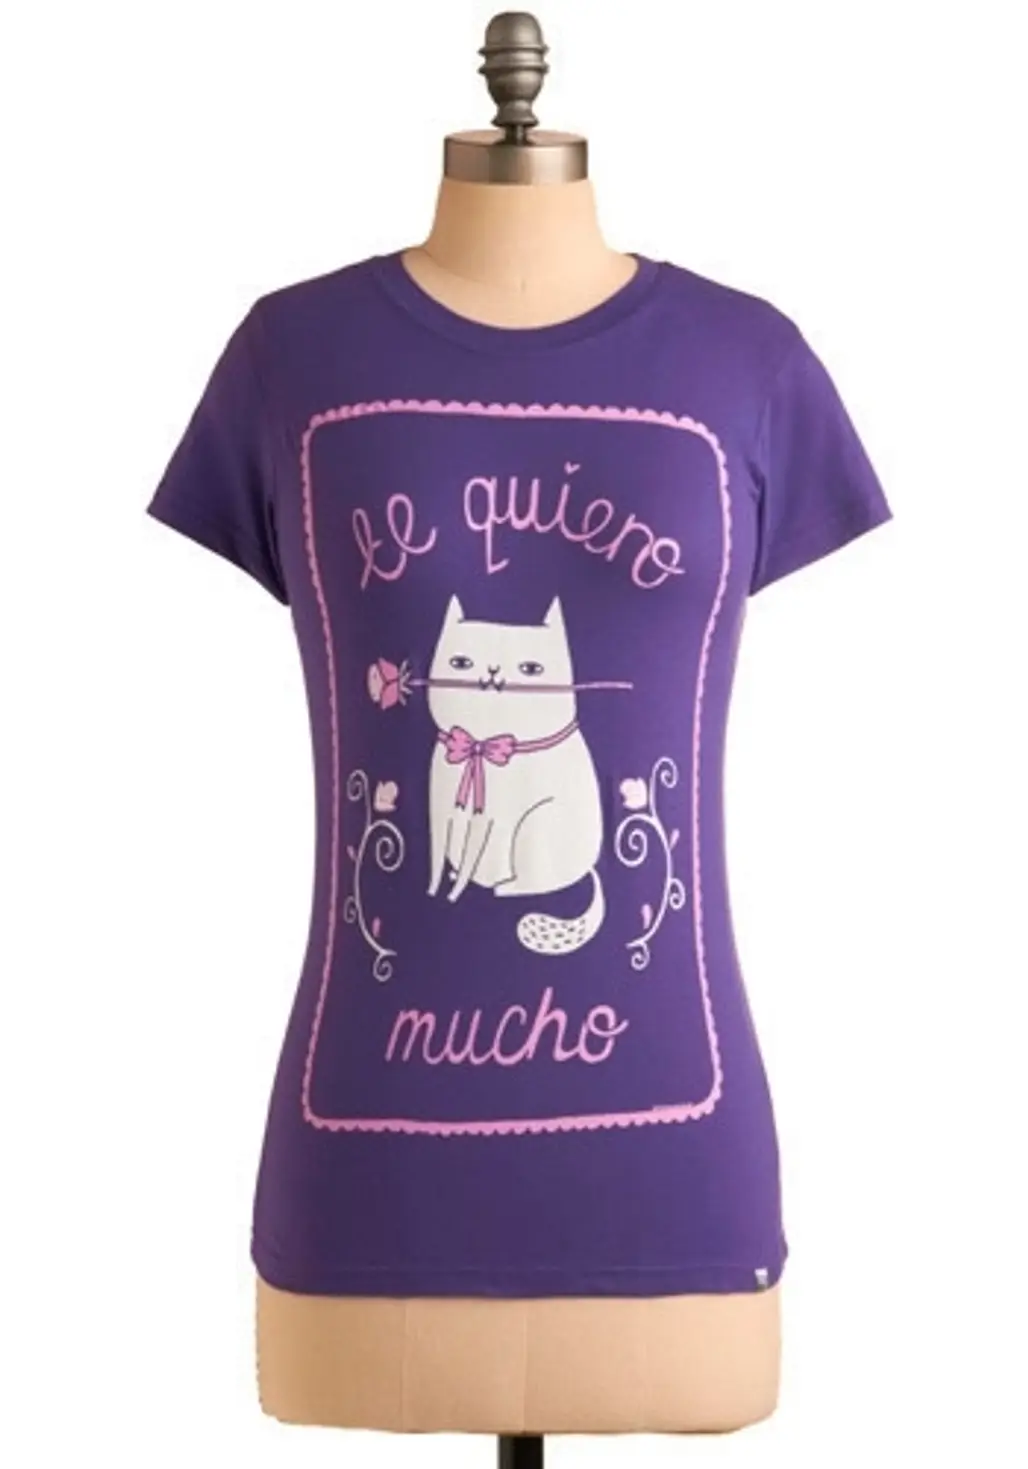 This Meow’s Forever Tee